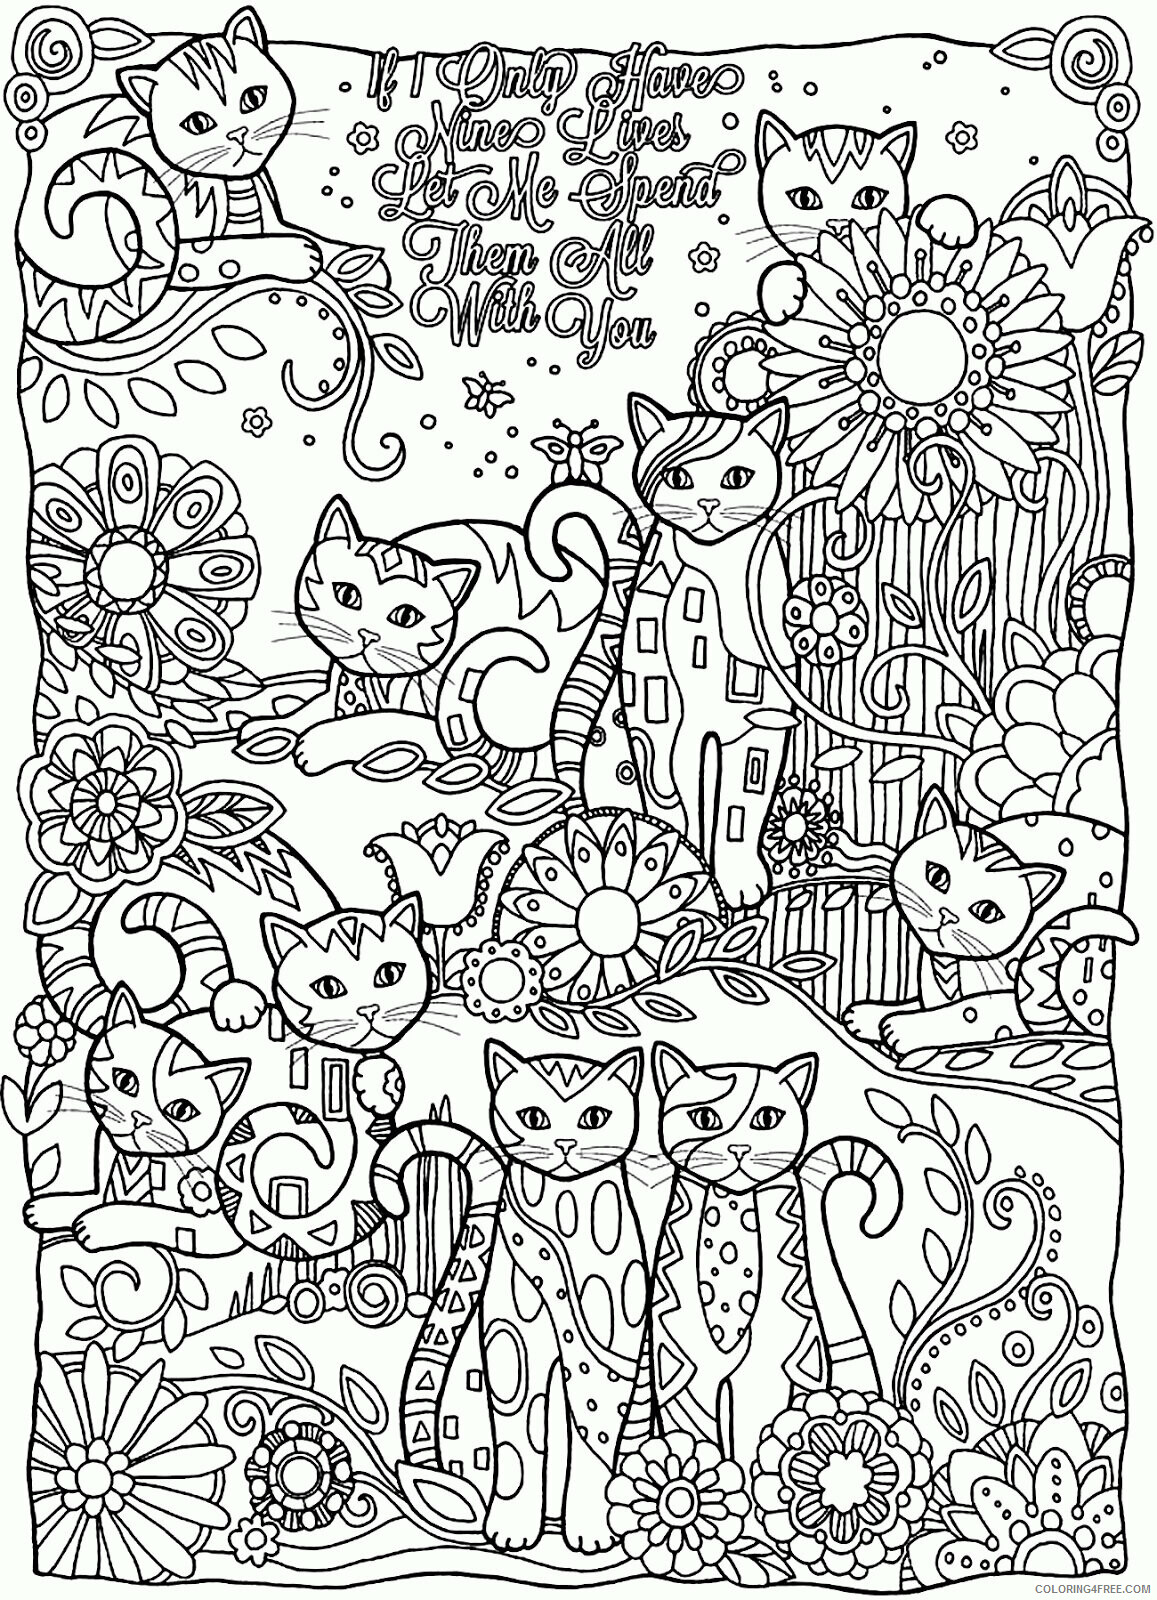 Adult Coloring Pages Landscapes Printable Sheets Page World jpg 2021 a 1970 Coloring4free